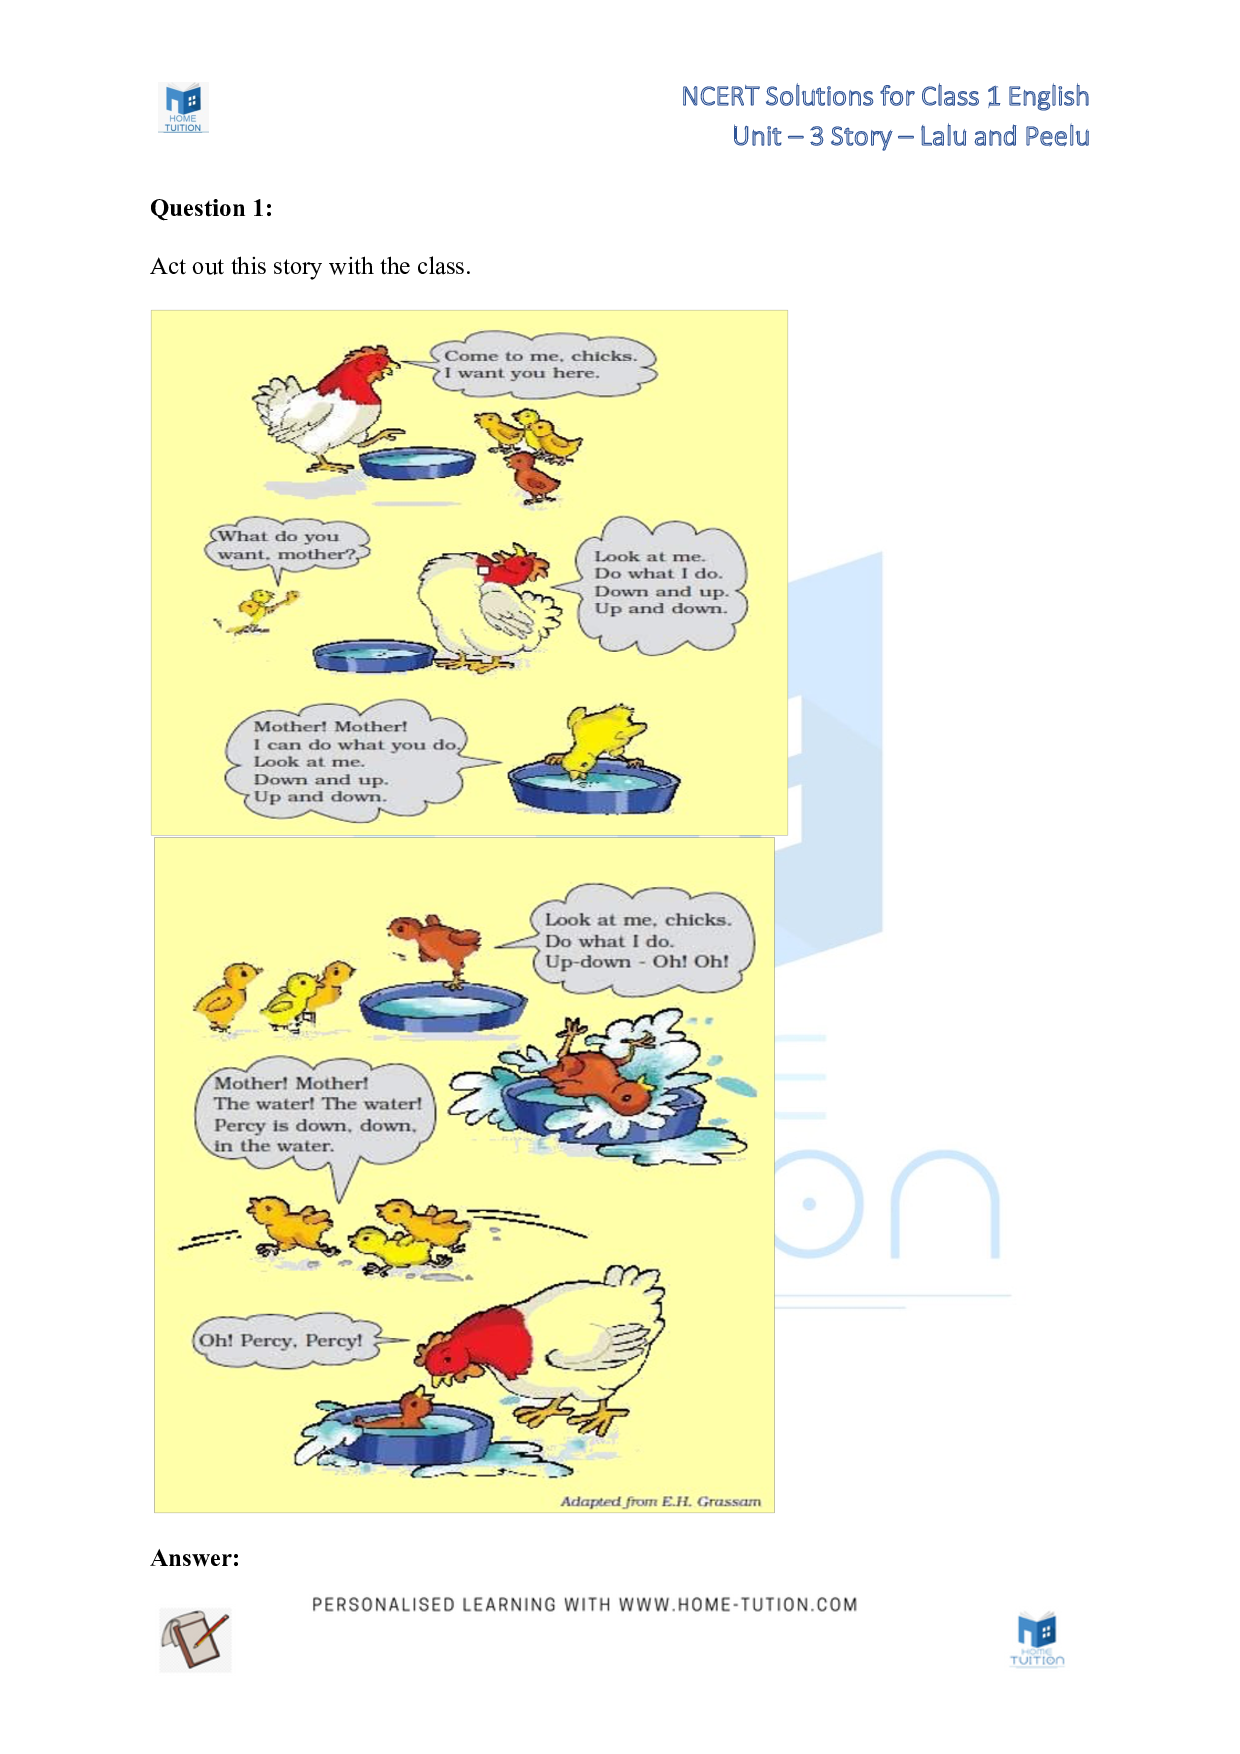 NCERT Solutions for Class 1 English Unit 3 Story - Lalu and Peelu